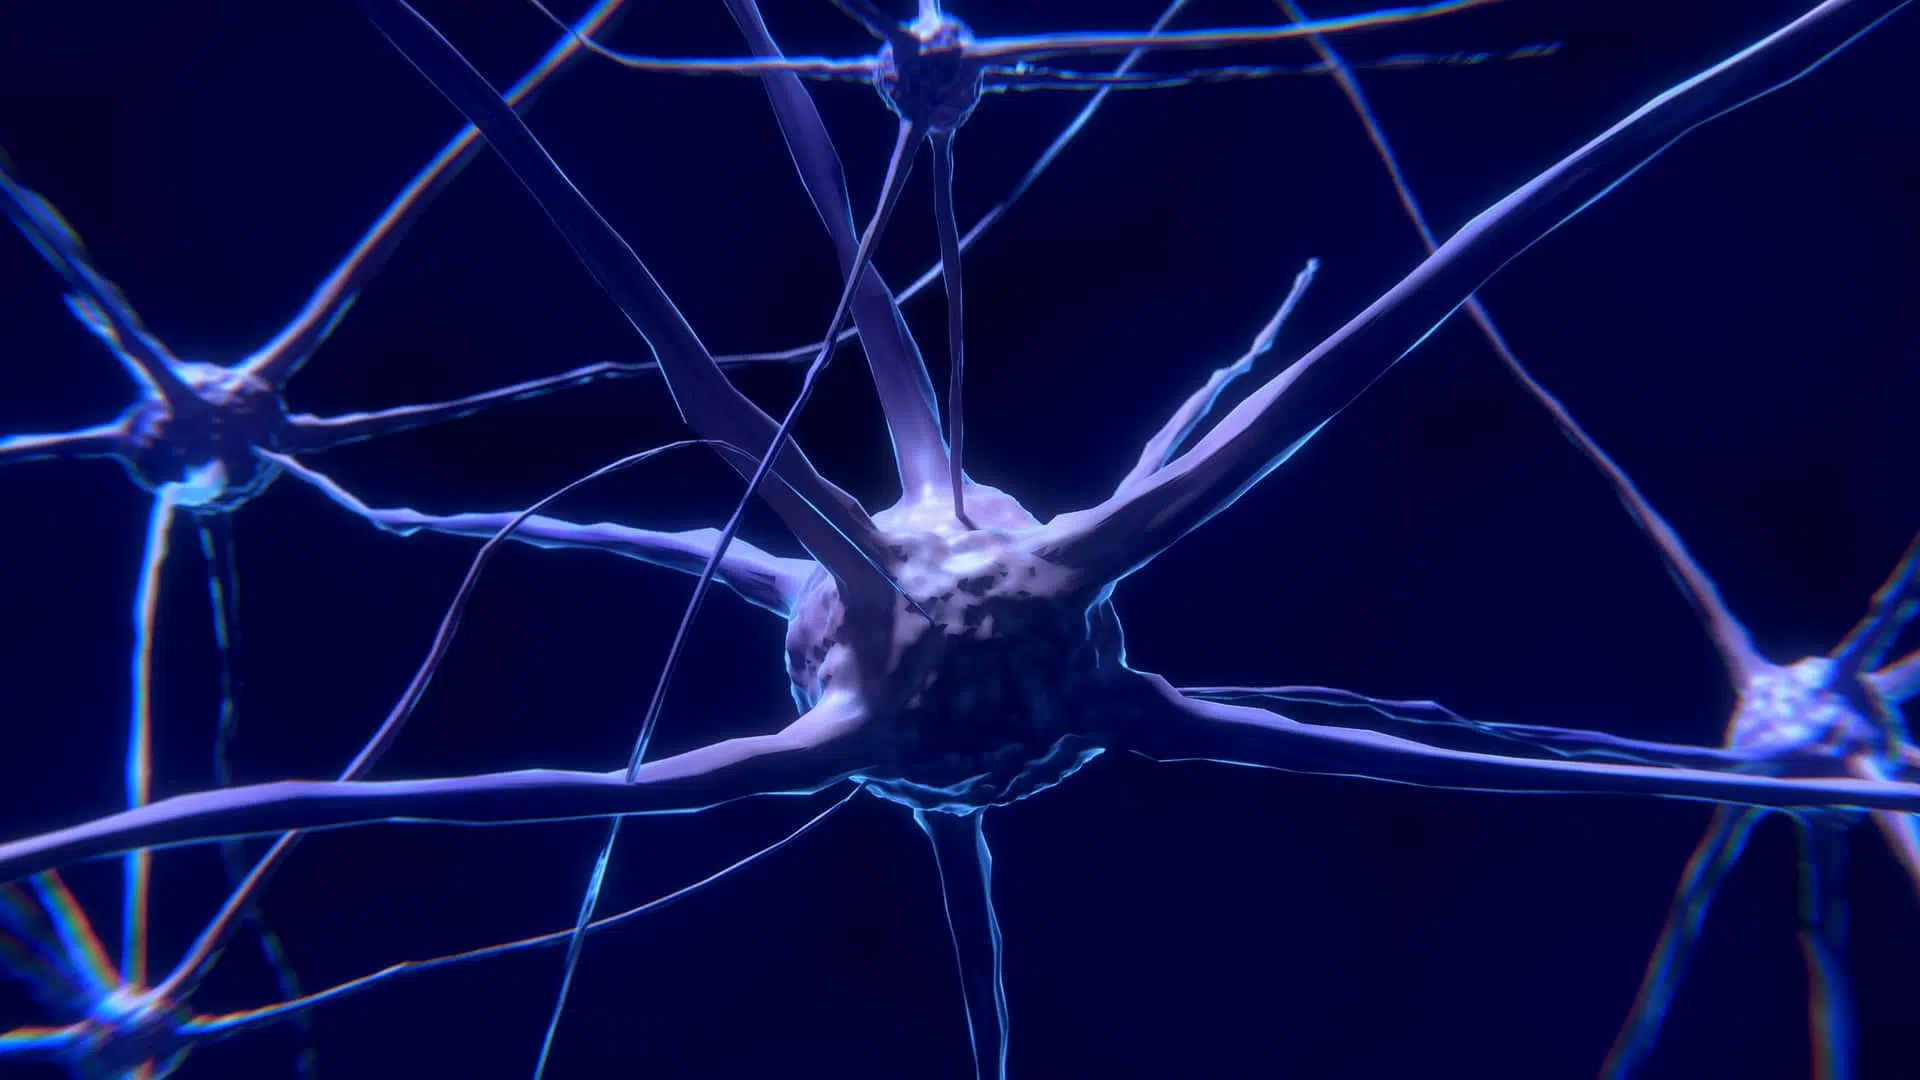 neurons or nerve cells in the brain